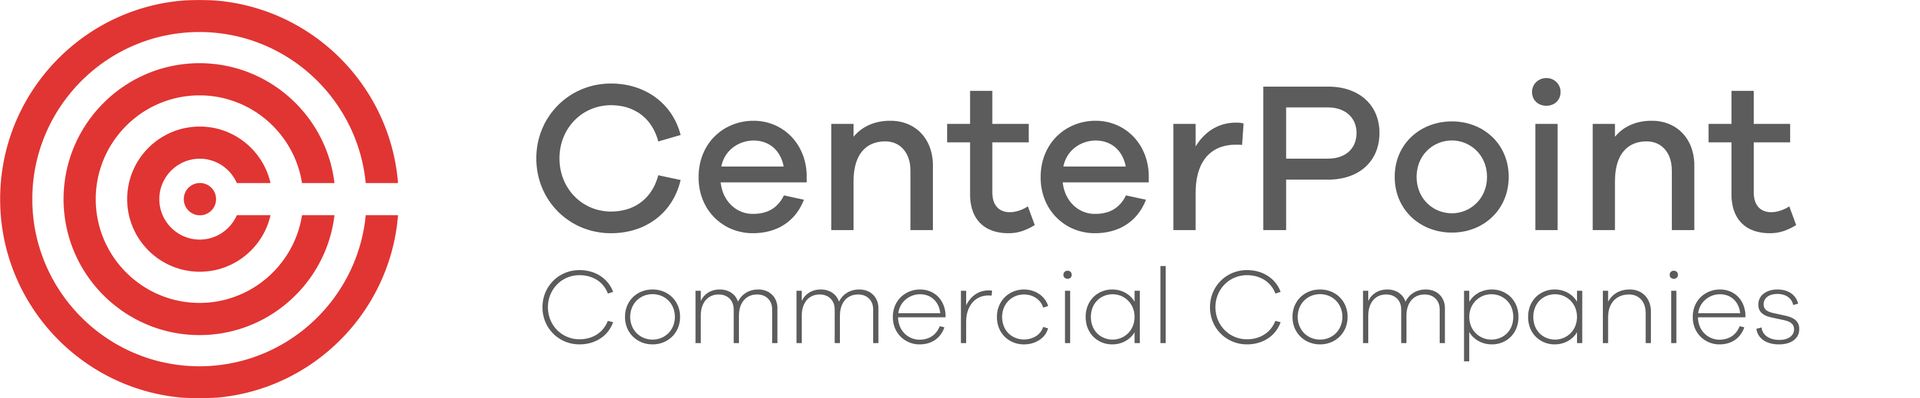 A logo for centerpoint commercial companies with a red target